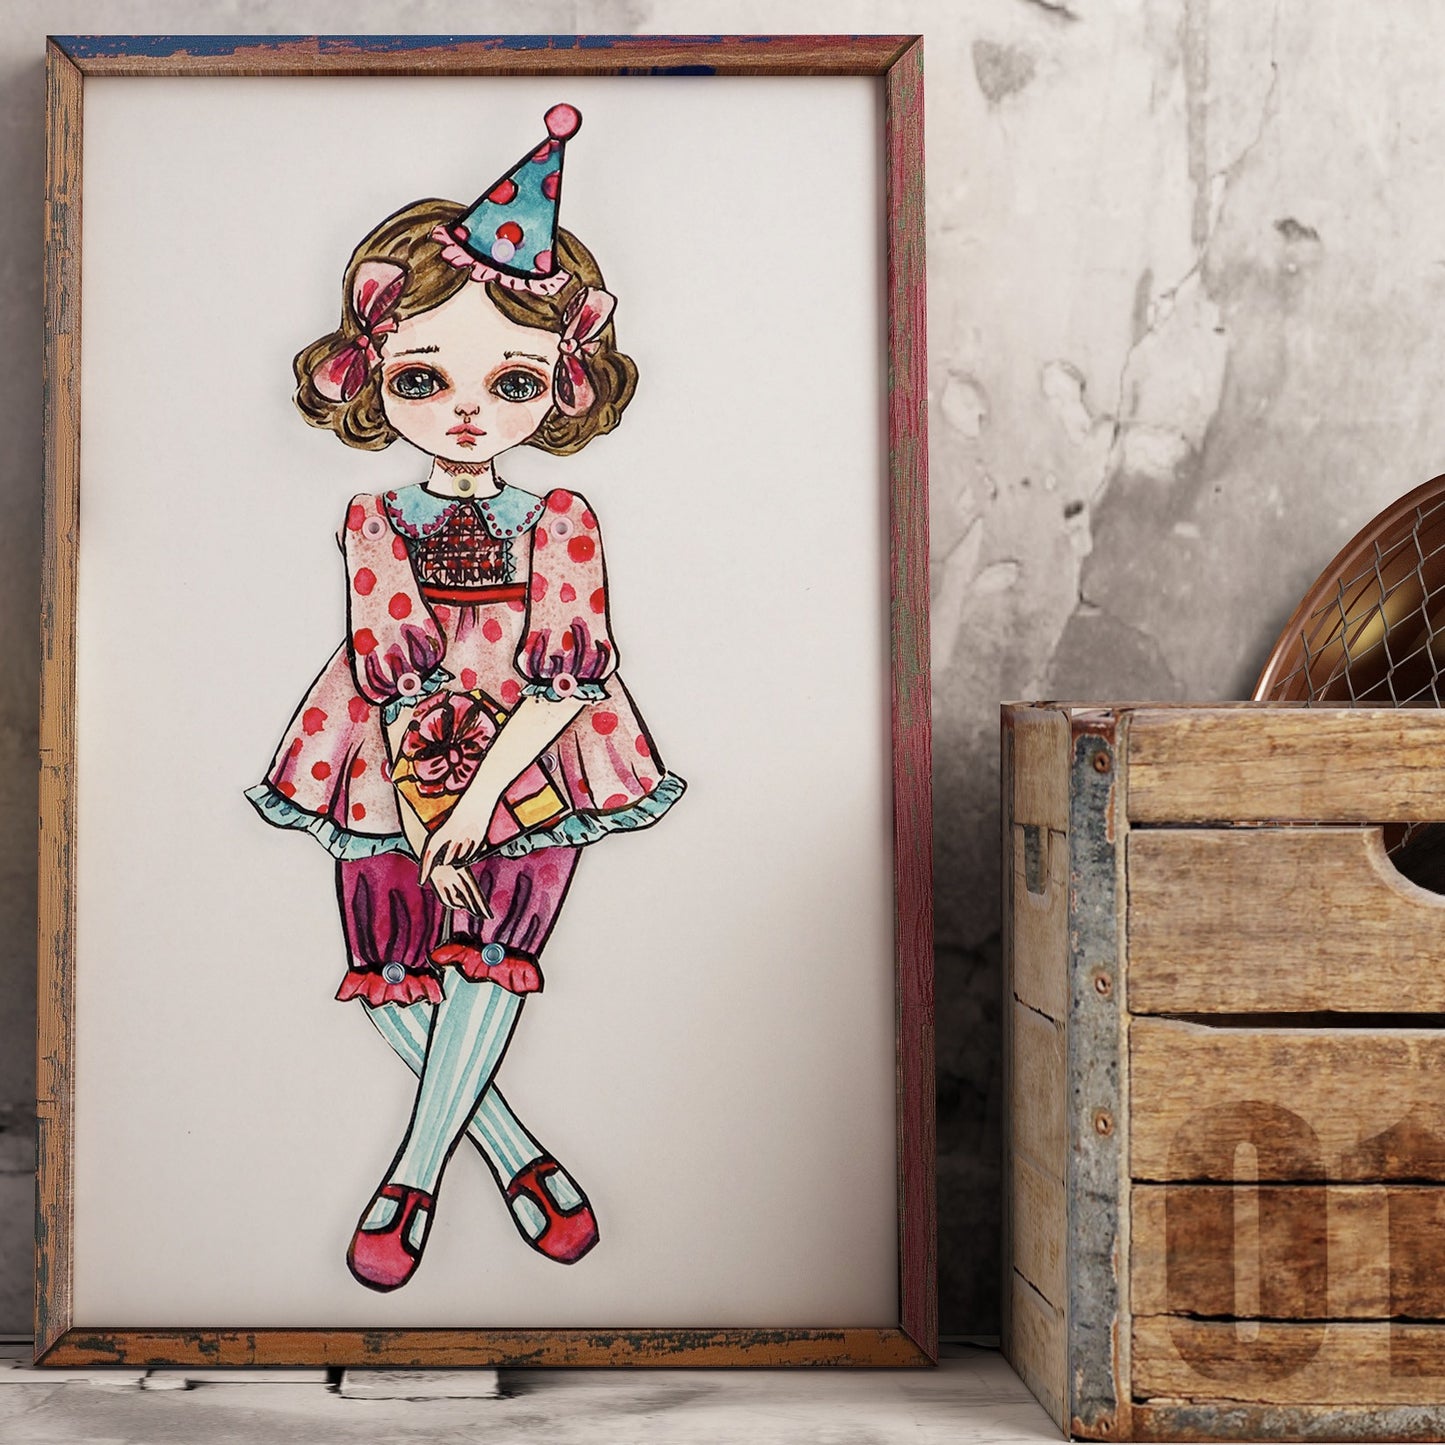 Jointed paper doll: The birthday girl, Art Doll by Danita Art